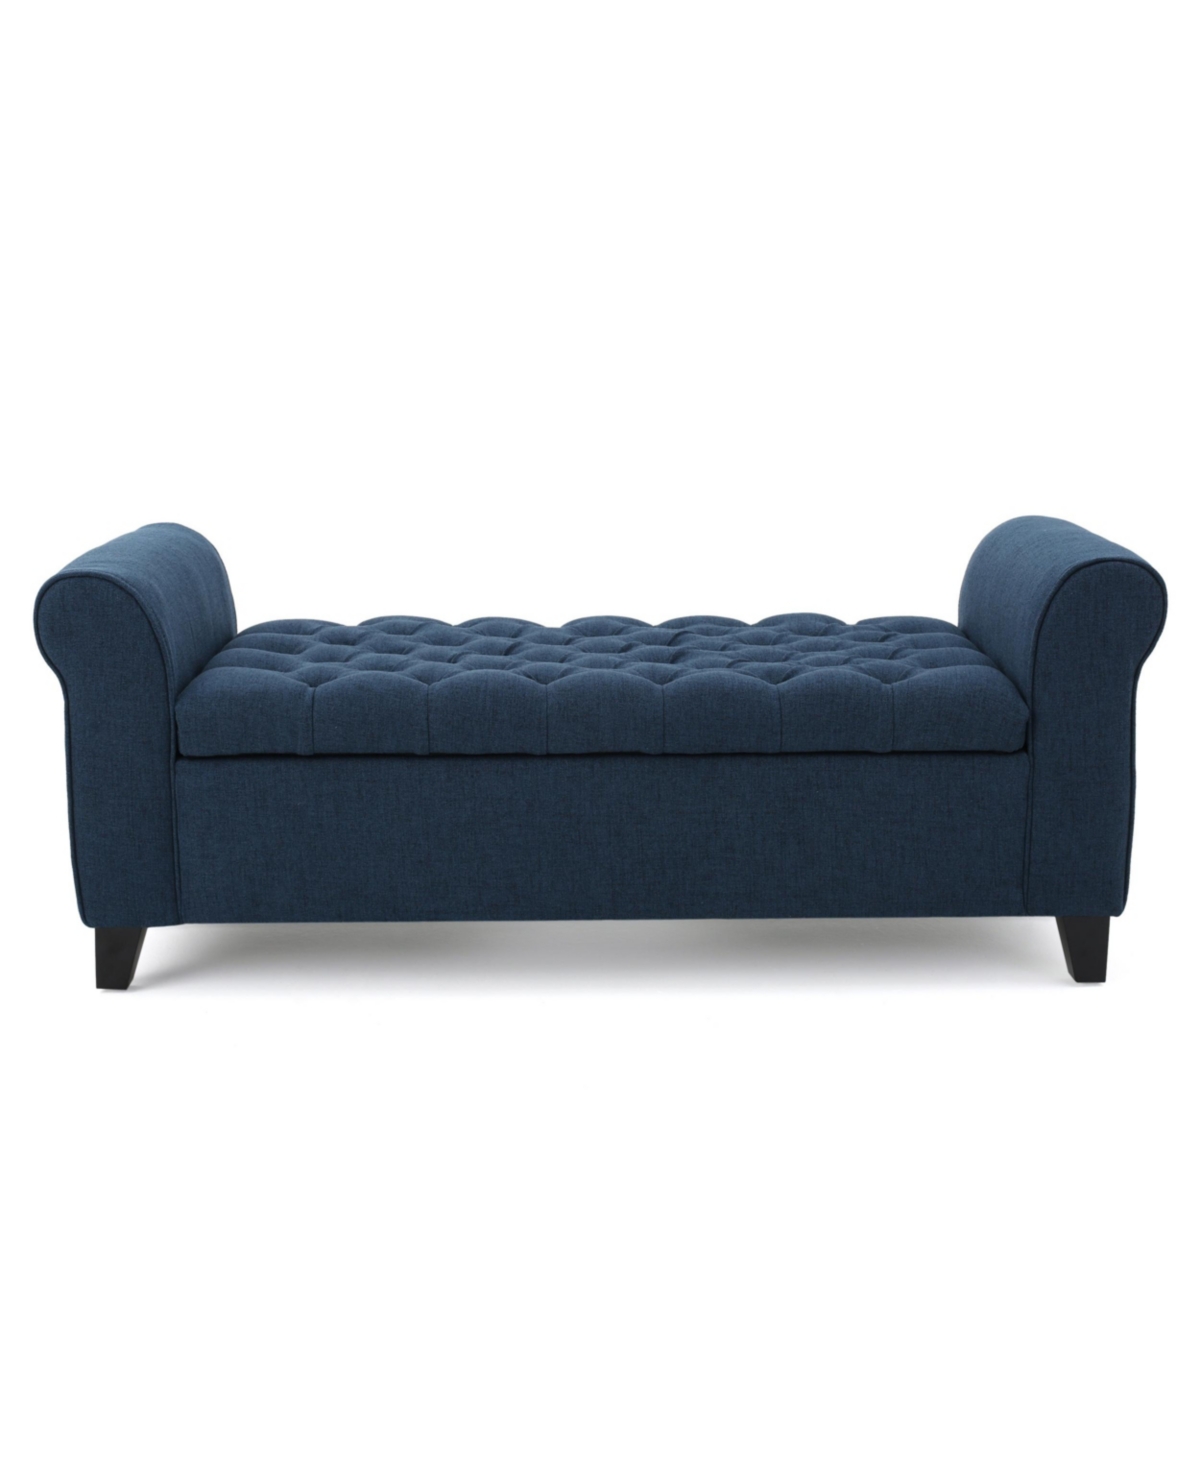 Noble House Keiko Contemporary Rolled Arm Storage Ottoman Bench In Dark Blue